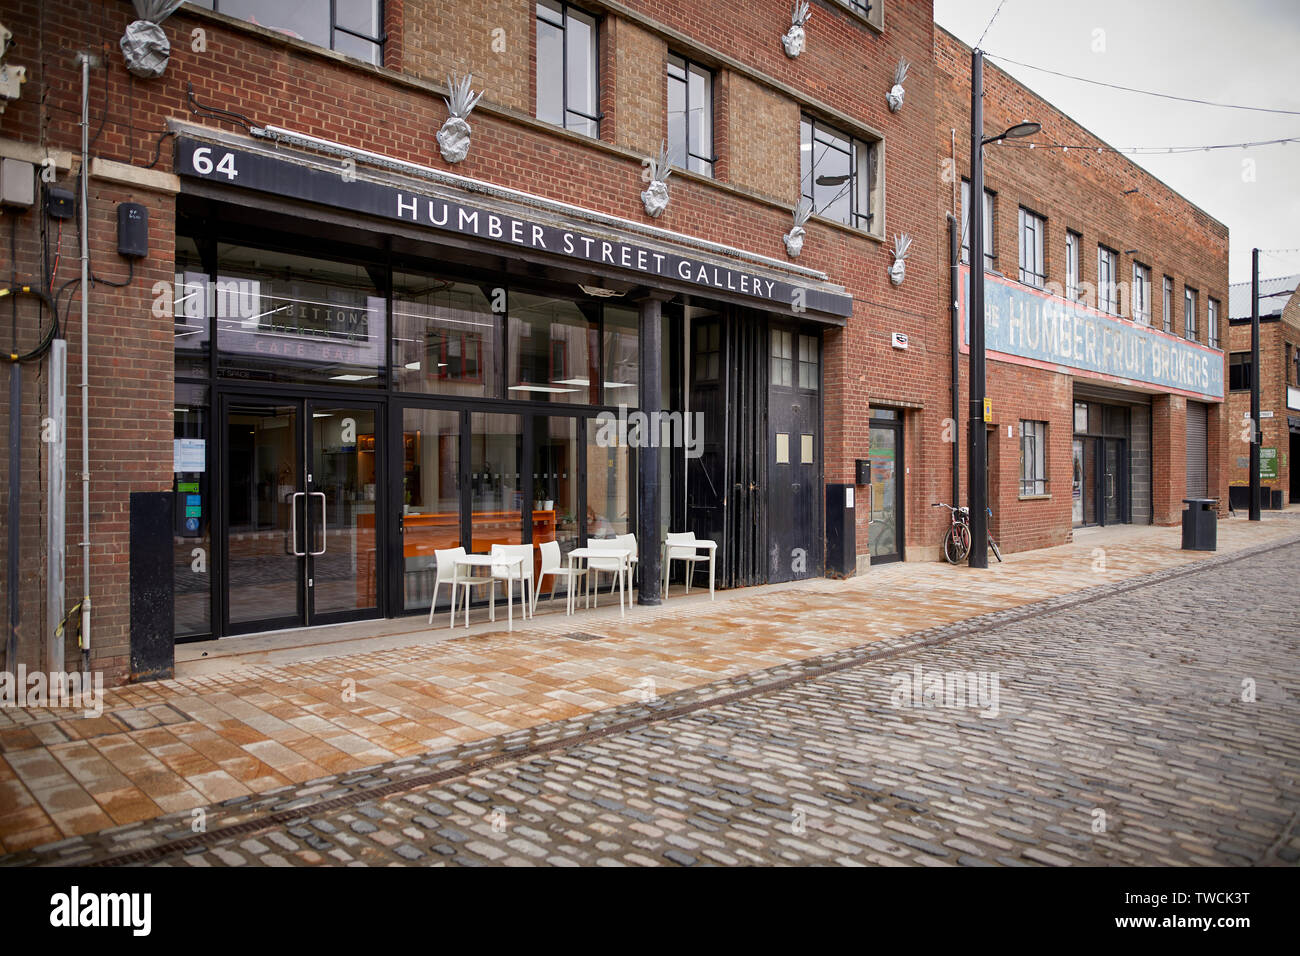 The Humber Street Gallery  in the city of Kingston upon Hull. The three-storey gallery was opened in February 2017 as part of that year's Hull UK City Stock Photo